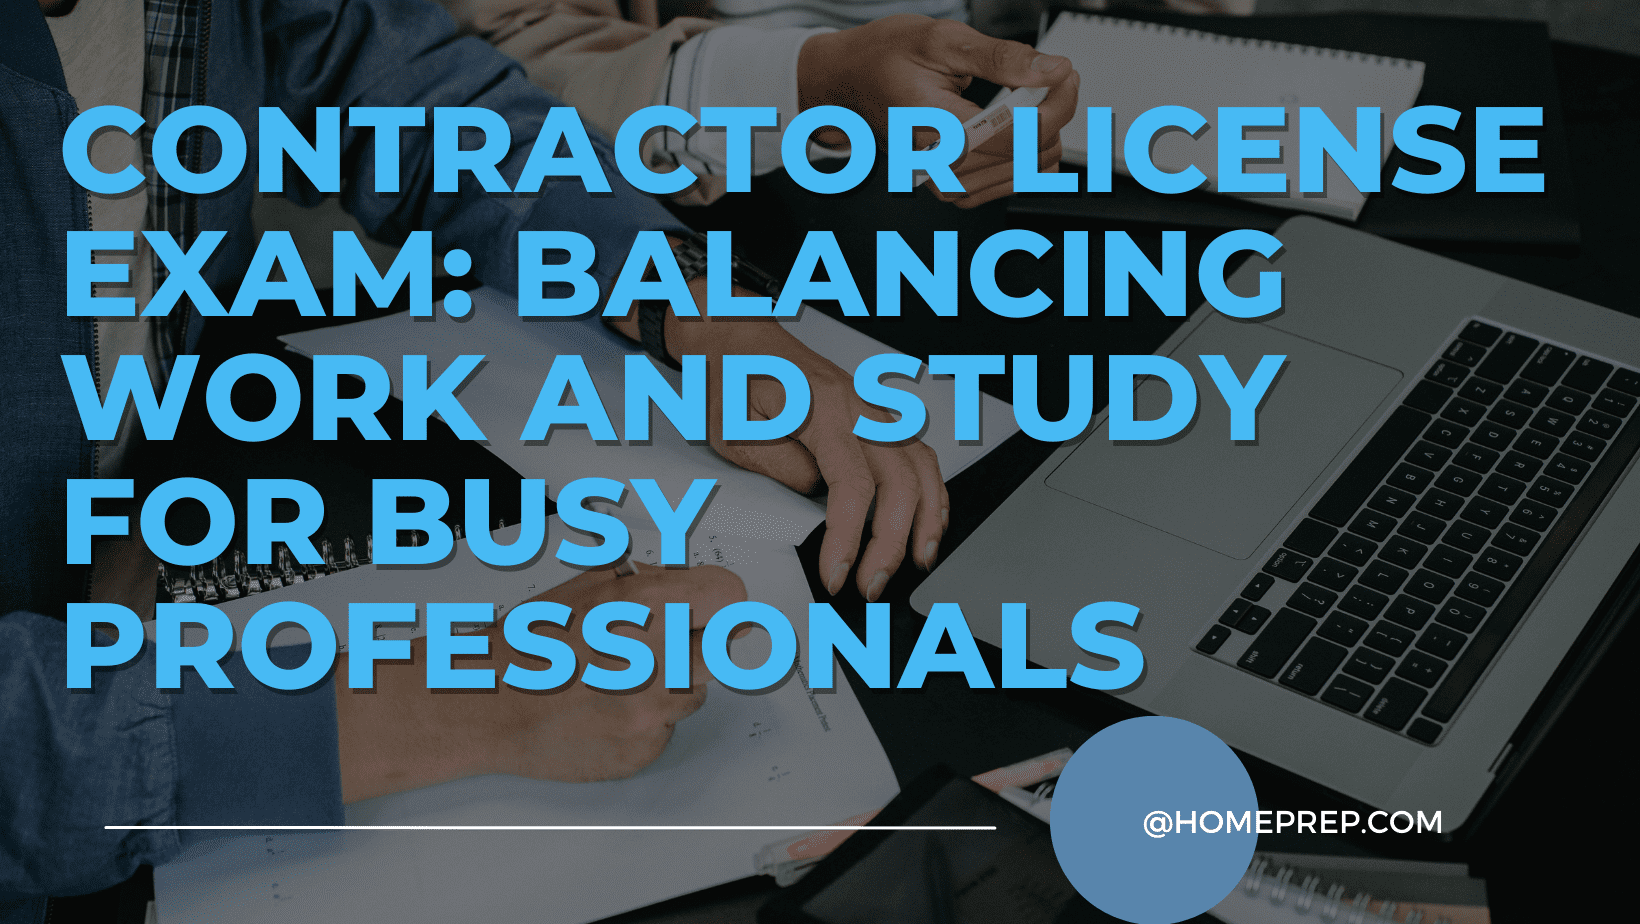 Contractor License Exam: Balancing Work and Study for Busy Professionals